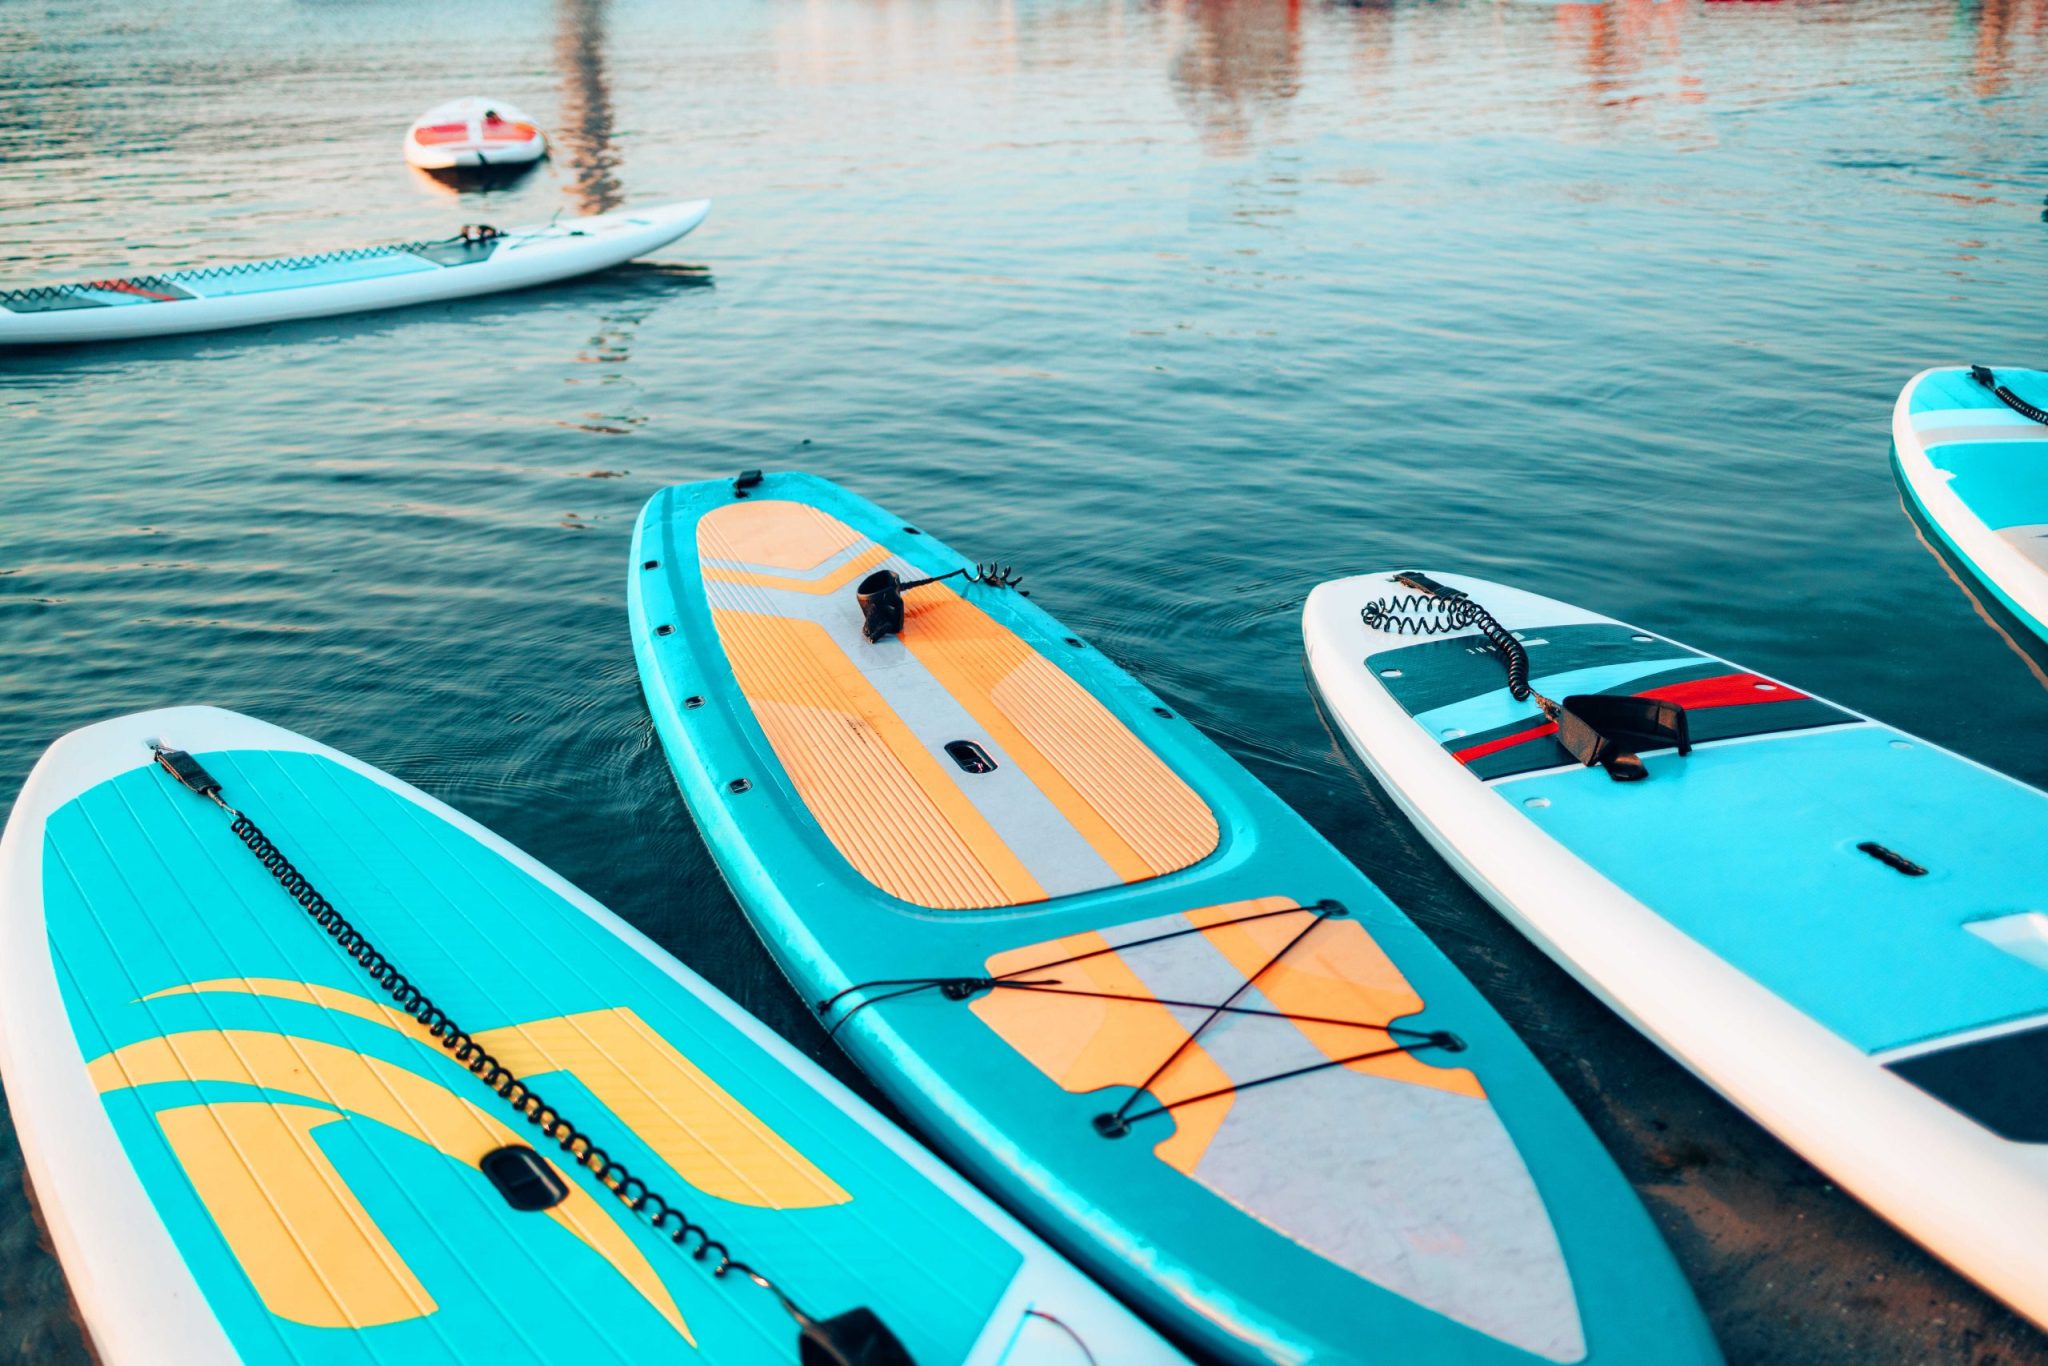 Standup Paddle Board Rentals sup stand up paddle board on the background blue w 2023 11 27 05 18 21 utc optimized scaled bbq donut boat rentals BBQ Donut Boat Rentals sup stand up paddle board on the background blue w 2023 11 27 05 18 21 utc optimized scaled